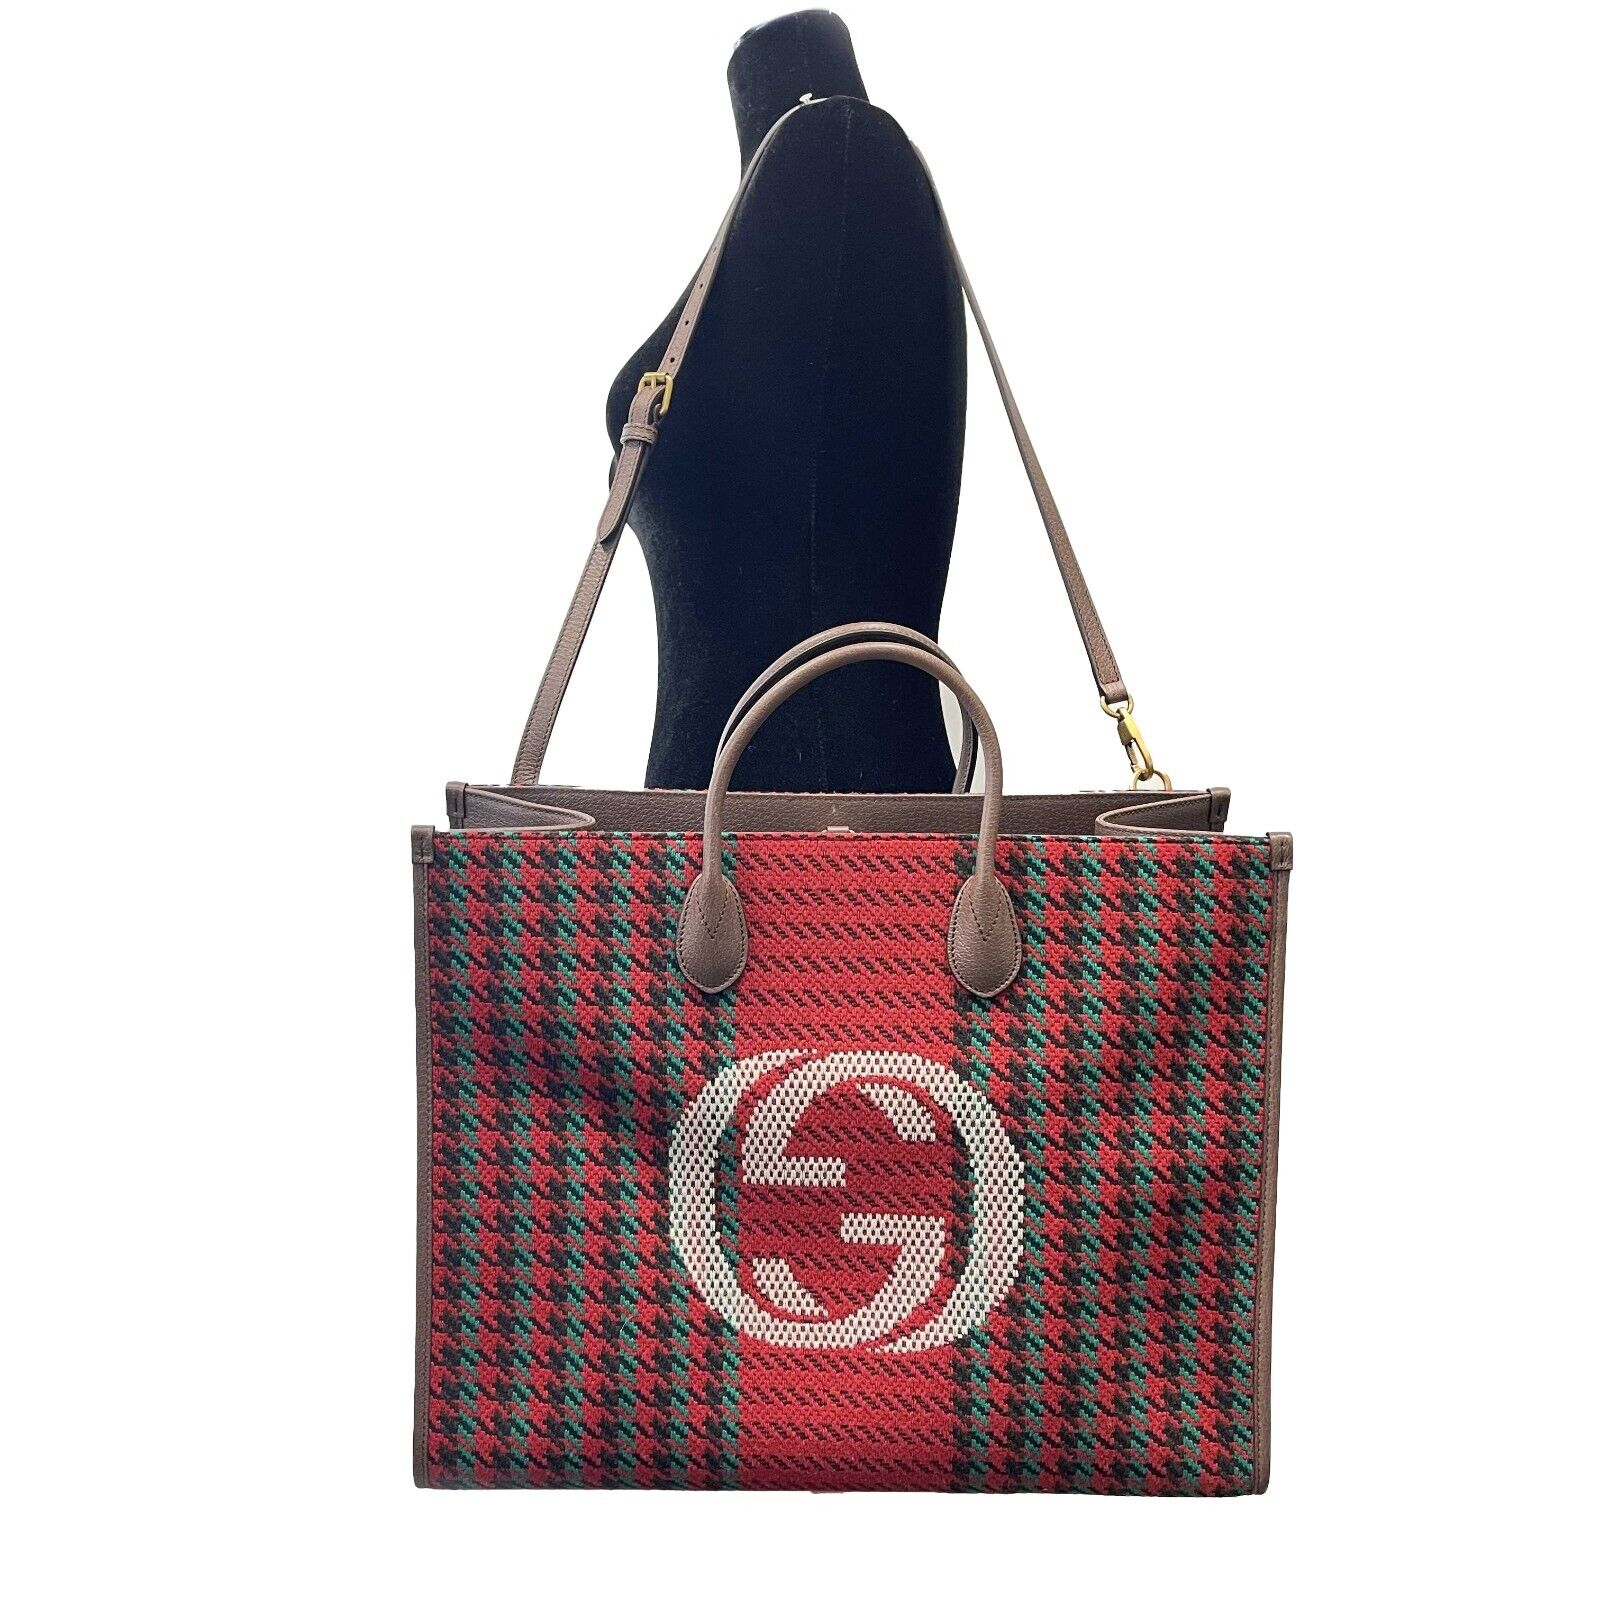 GUCCI - NEW Large Houndstooth GG Tote w / Shoulder Strap